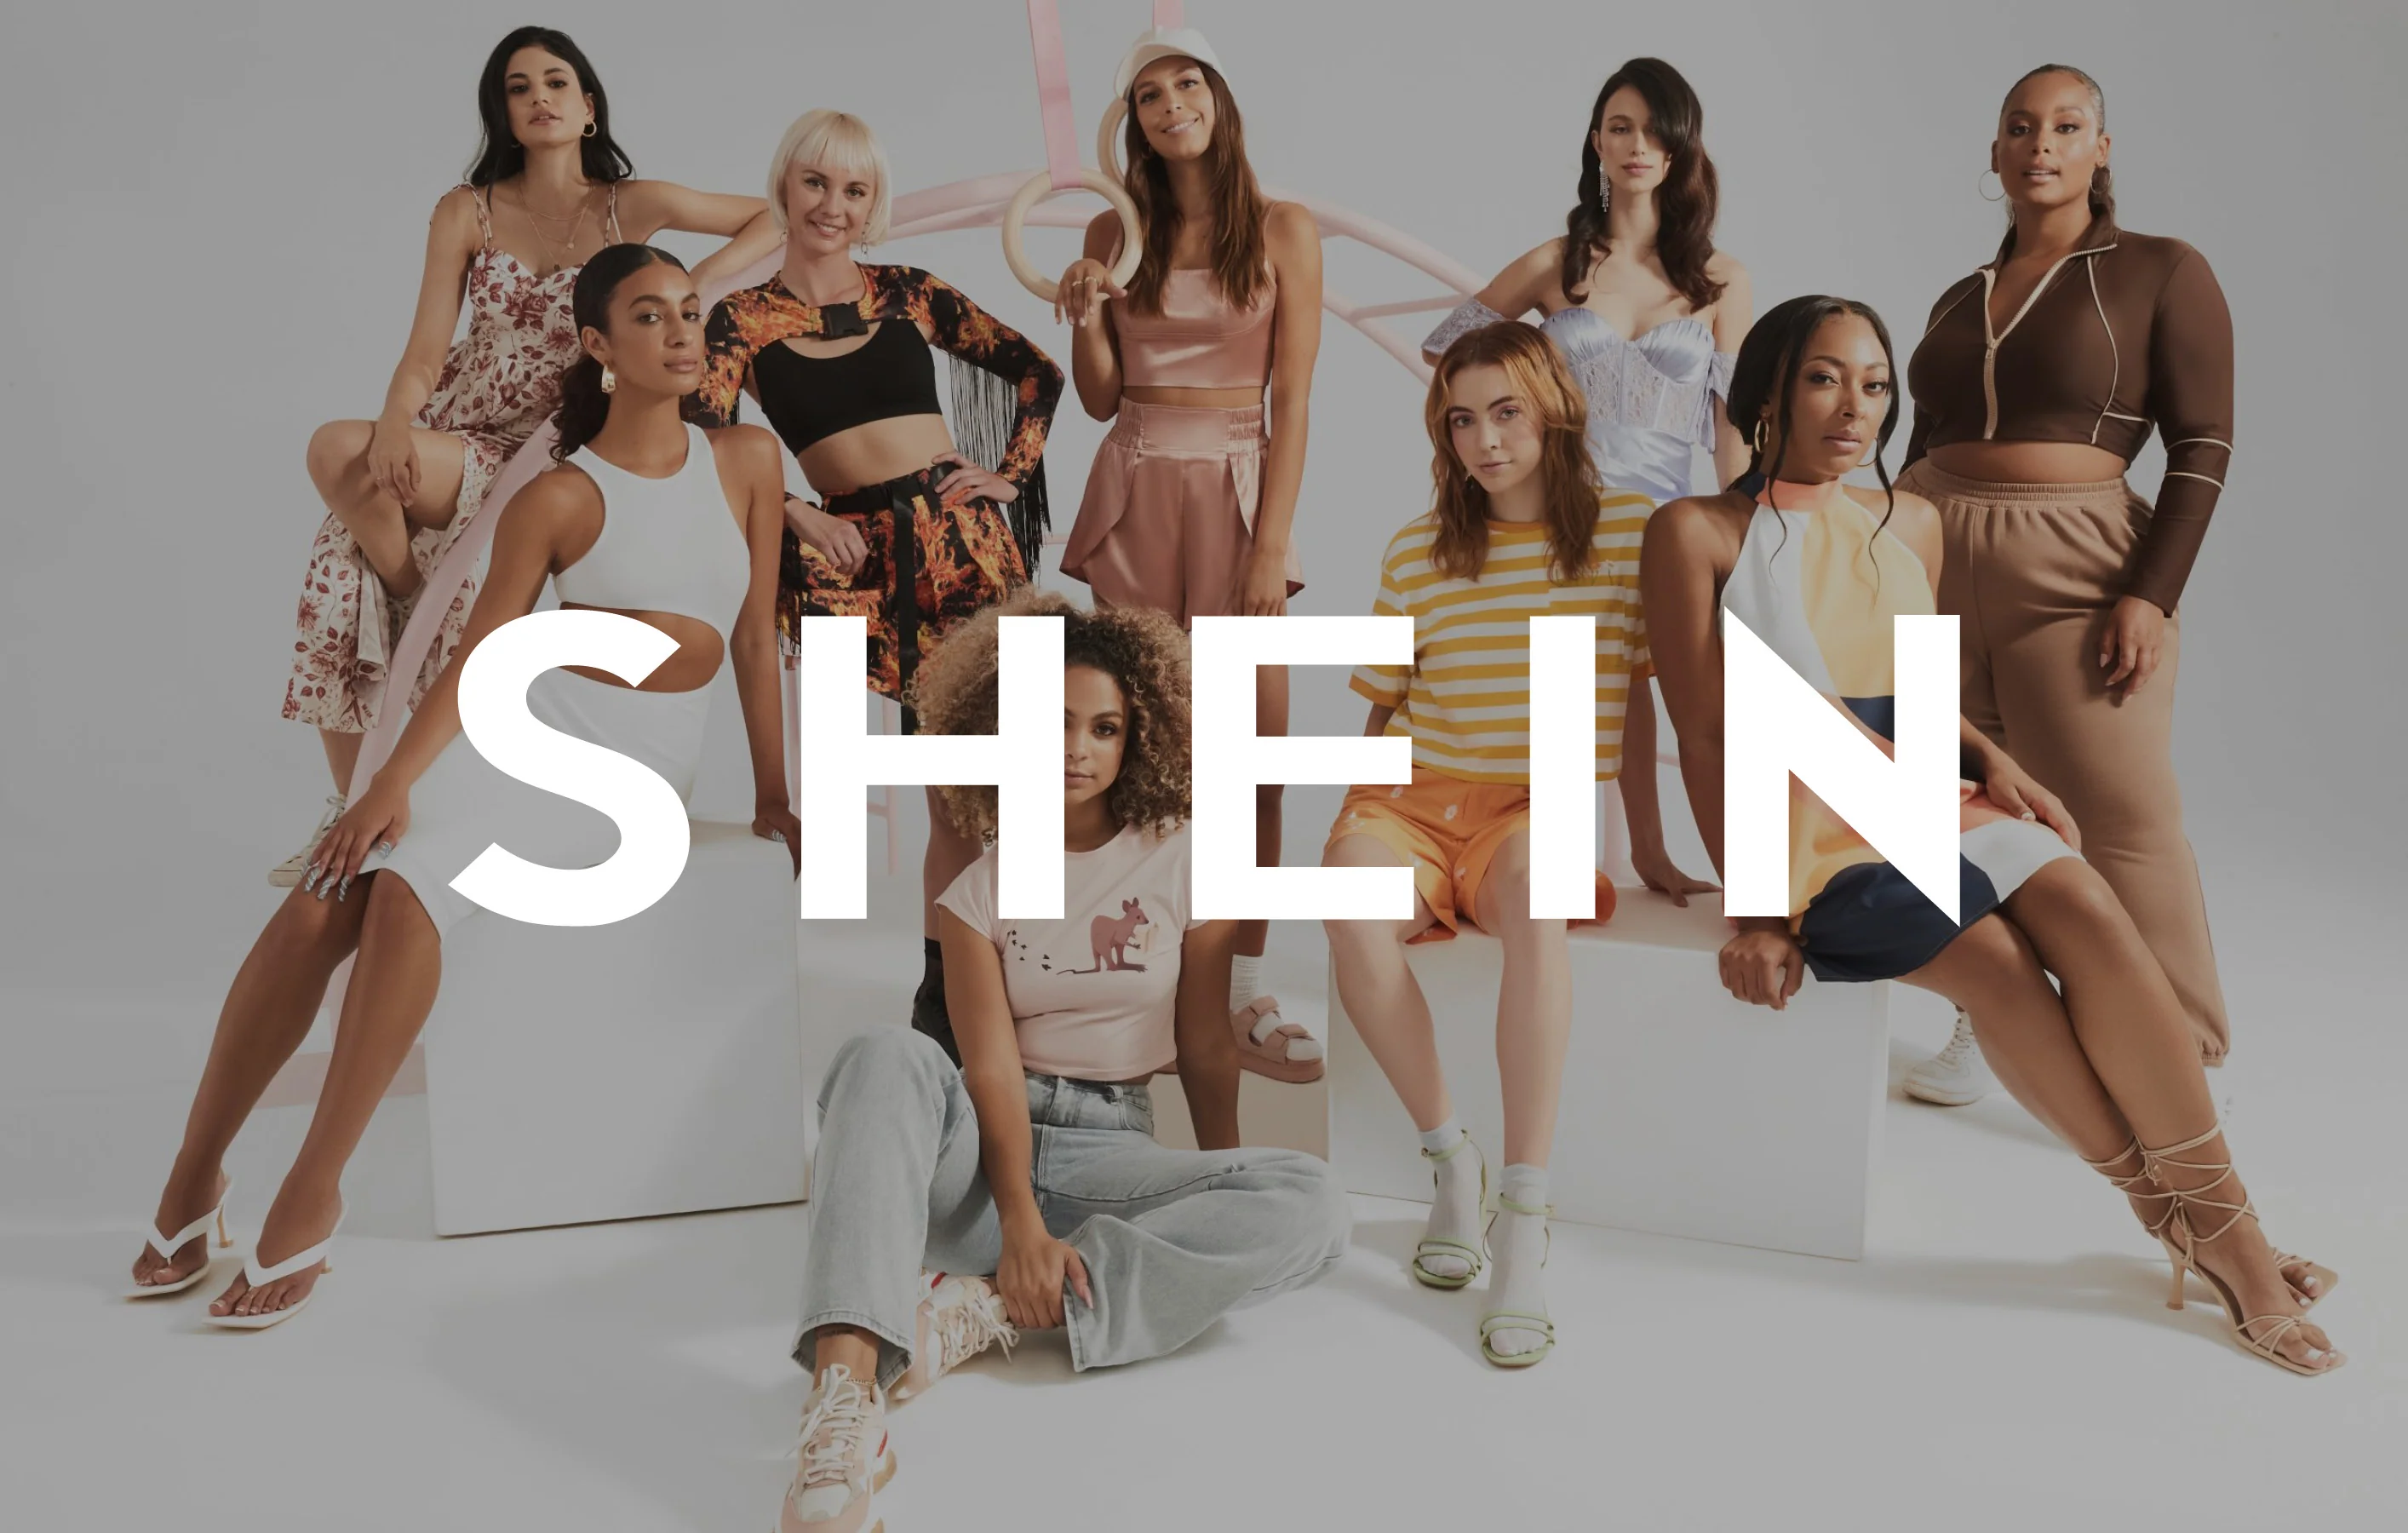 Title: “Starting a Dropshipping Business with Shein Products”